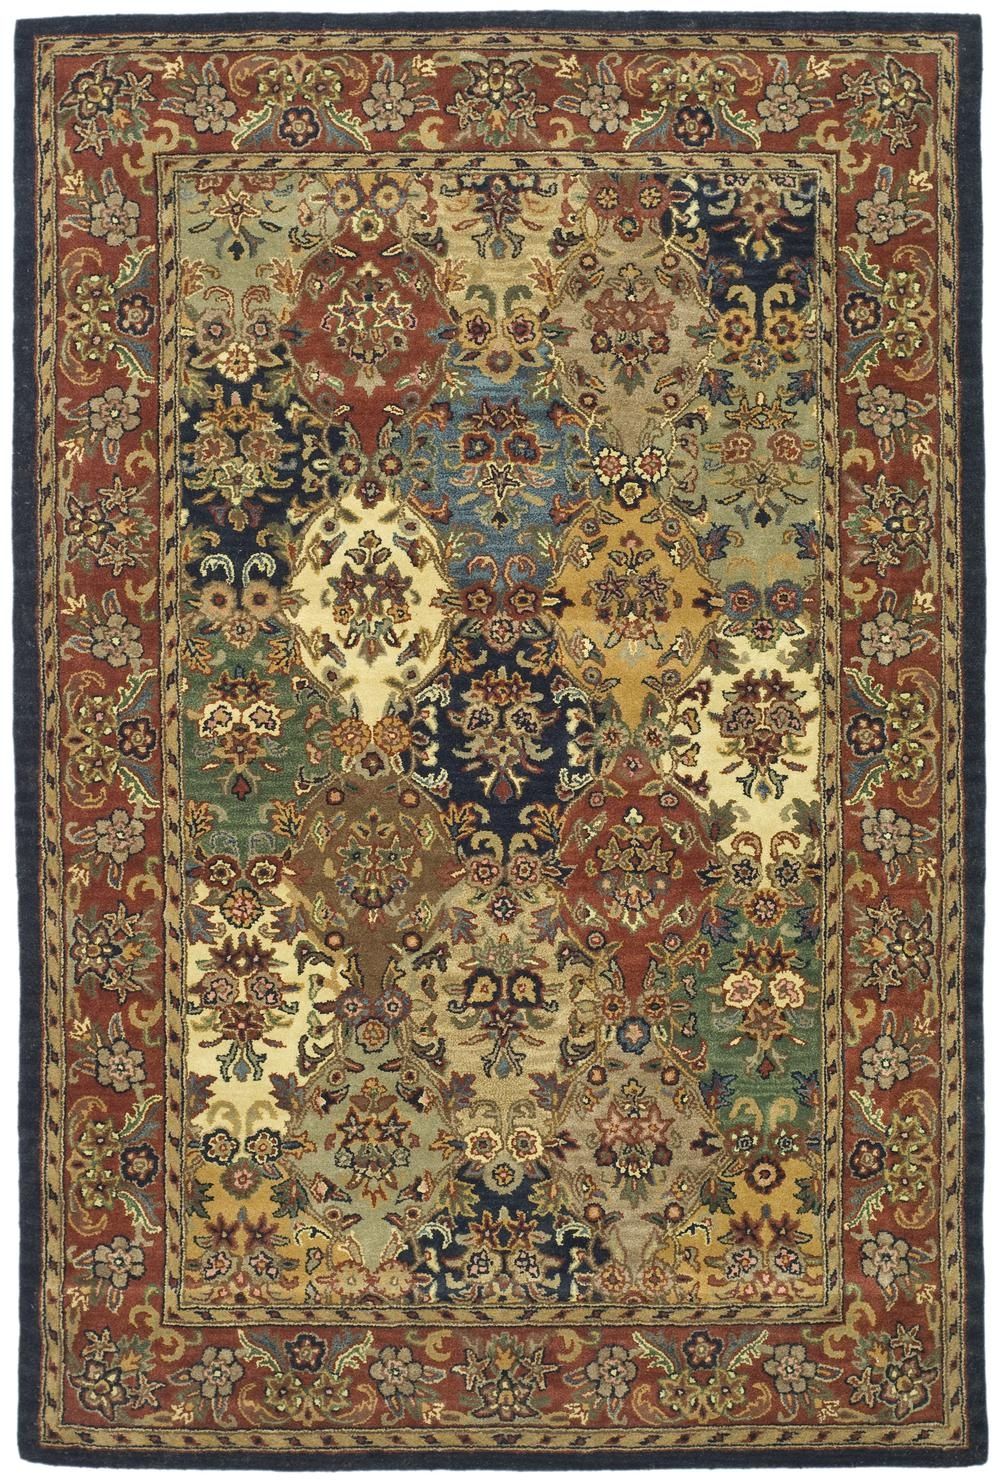 Discount Wool Area Rugs Starting At 13 Free Shipping Bold Rugs Throughout Discount Wool Area Rugs (Photo 4 of 15)